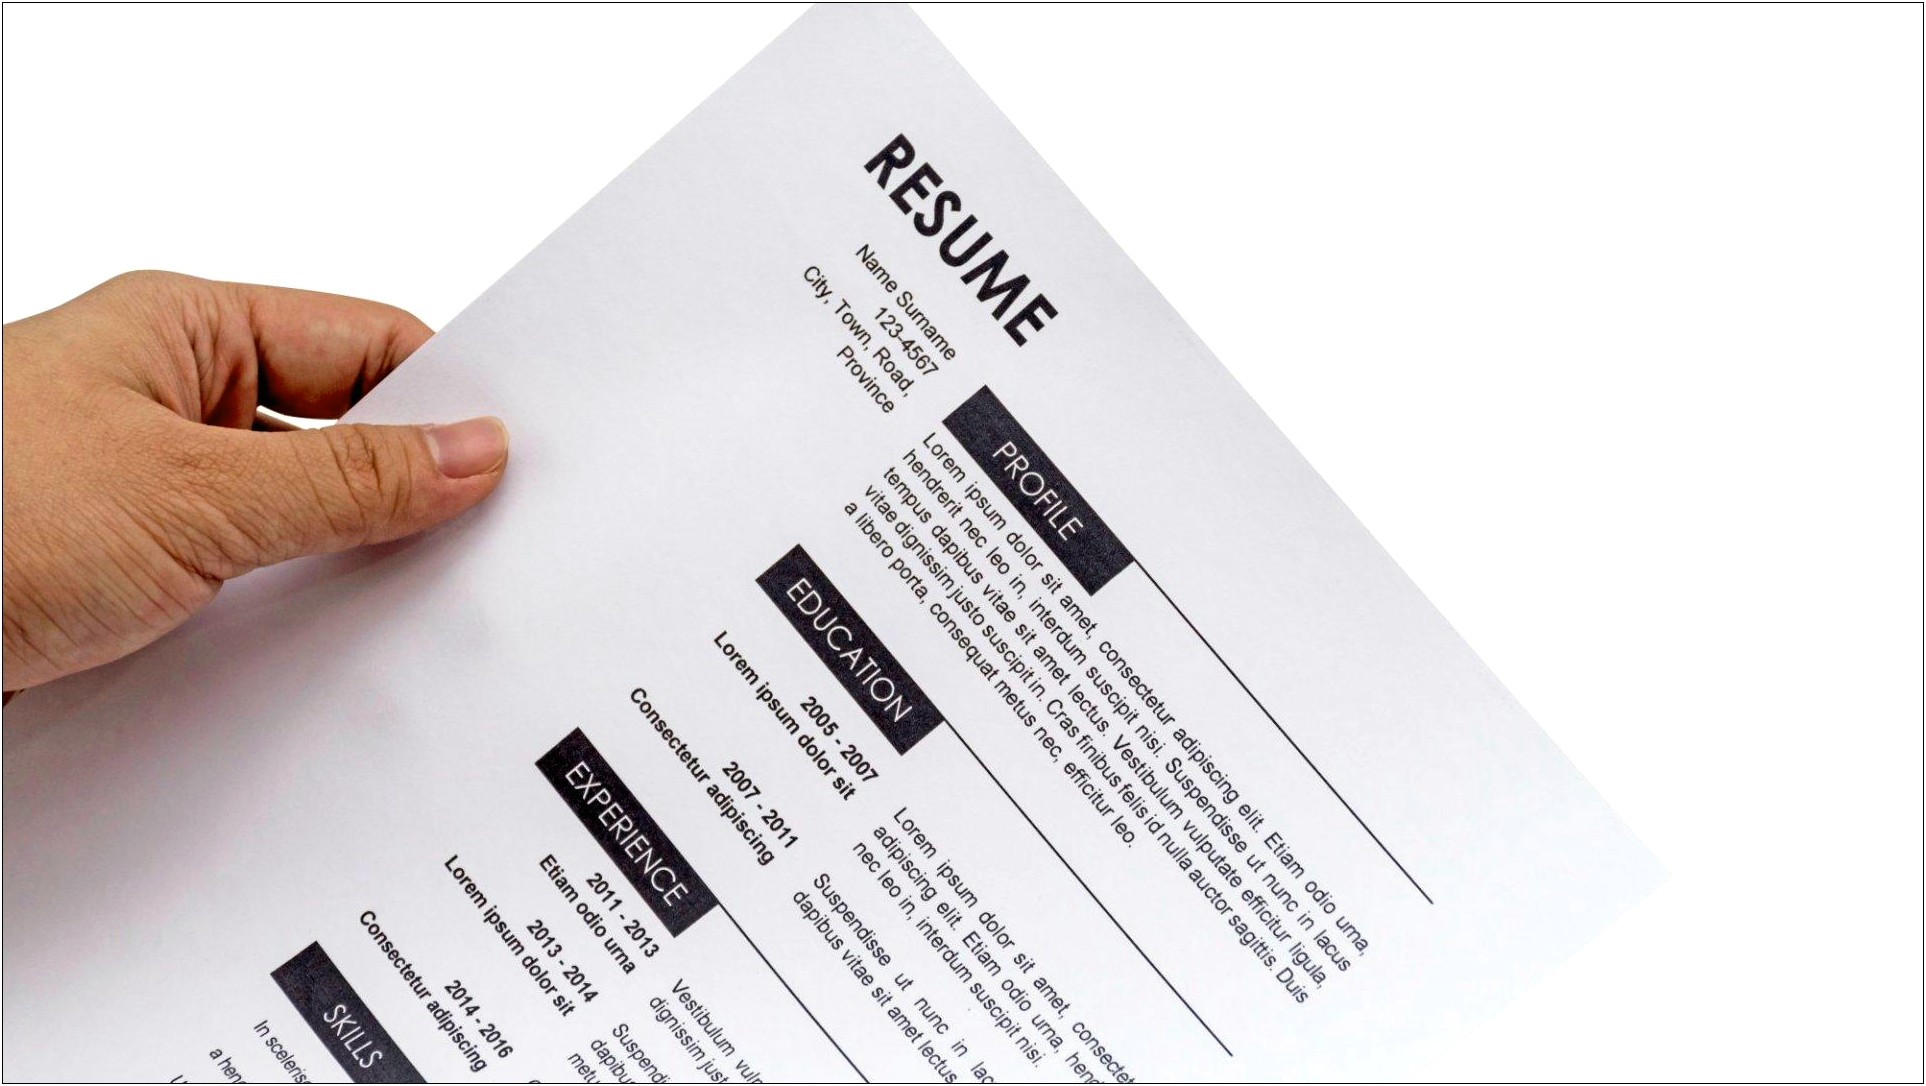 Can You Hide Your Resume In Job Applications